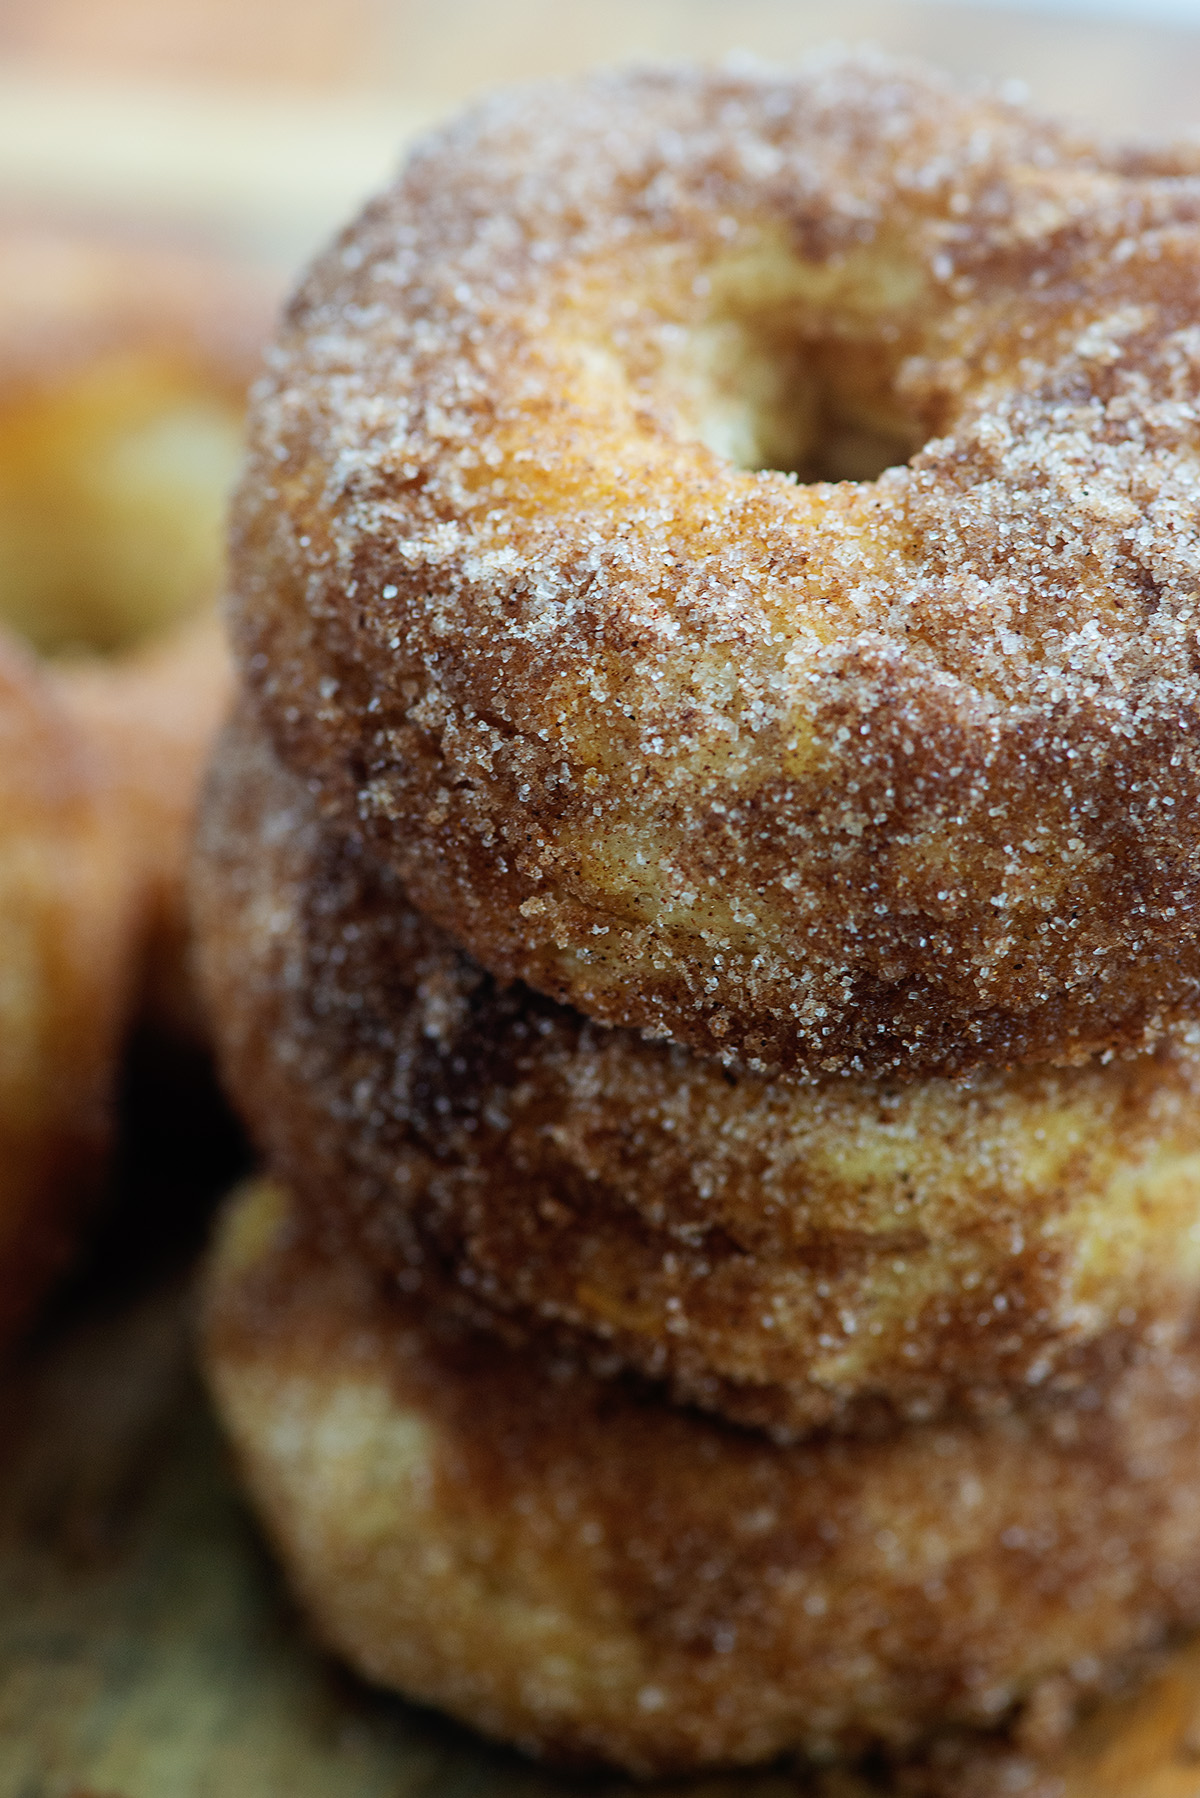 A stack of three biscuit donuts covered in cinnamon and sugar